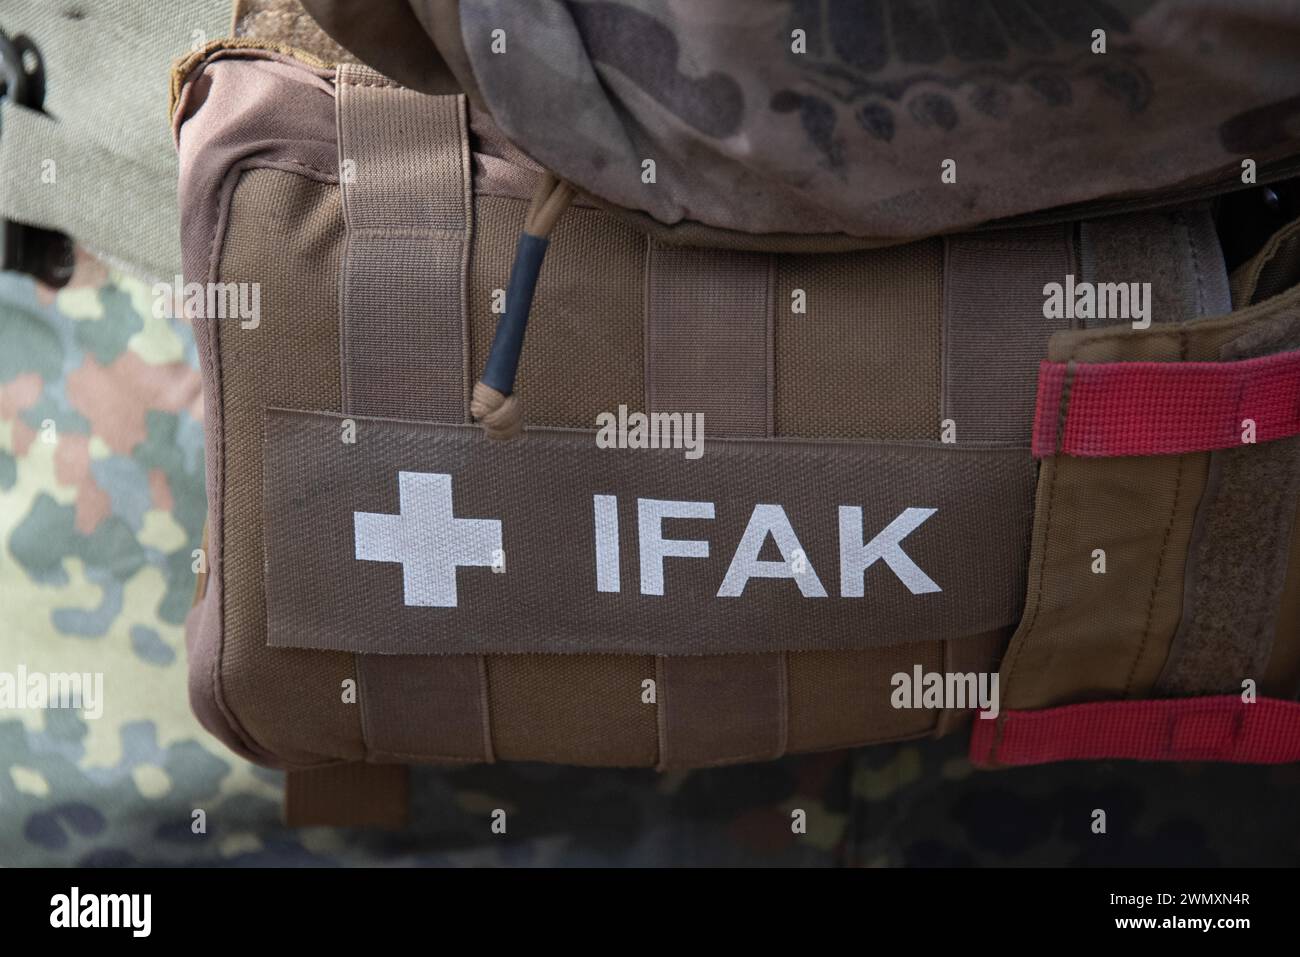 A brown military bag labelled 'IFAK' attached to a camouflage uniform, First Aid Kit, First Aid Bag, Germany Stock Photo